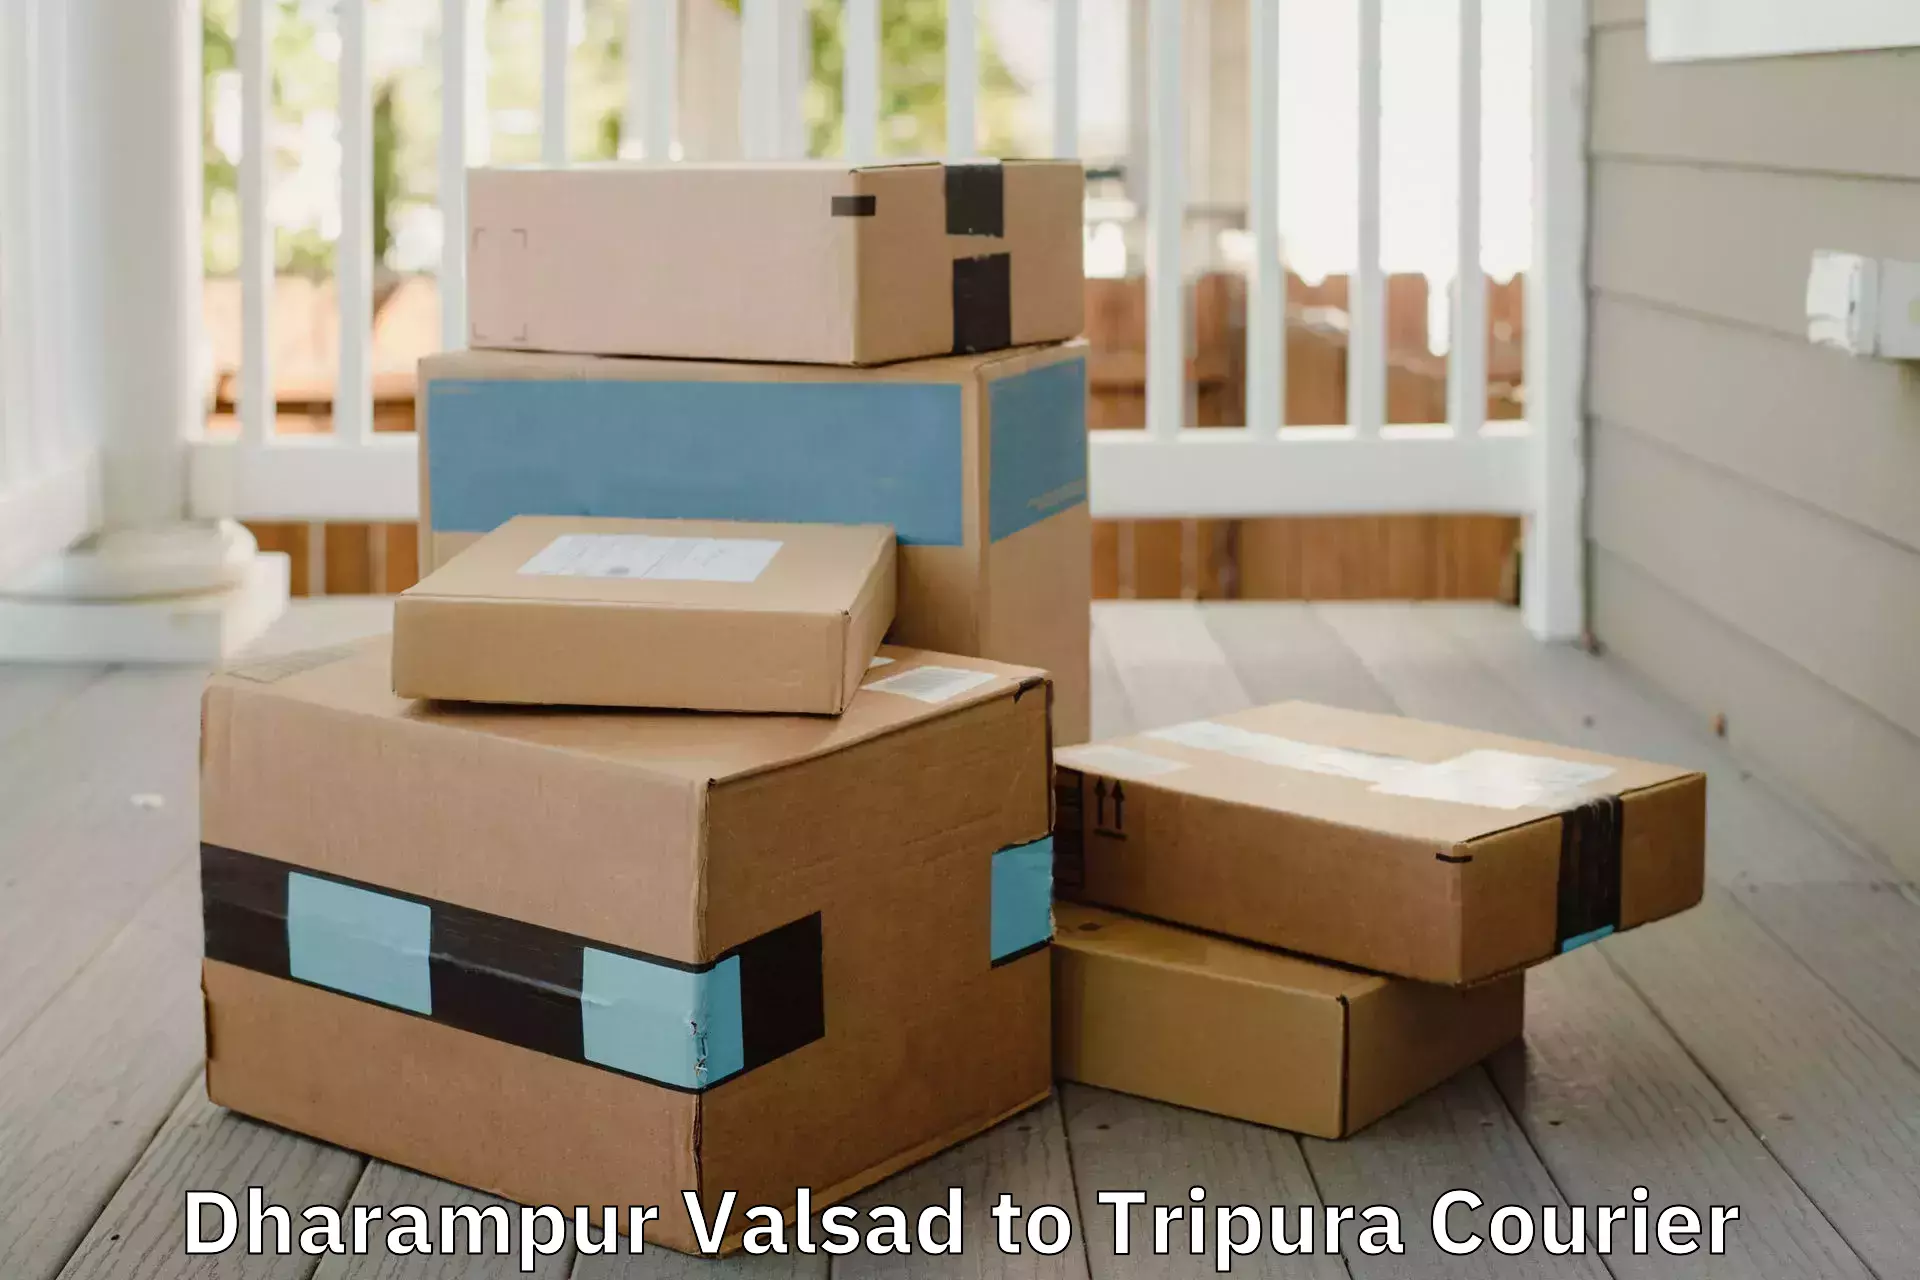 Home relocation solutions Dharampur Valsad to Udaipur Tripura